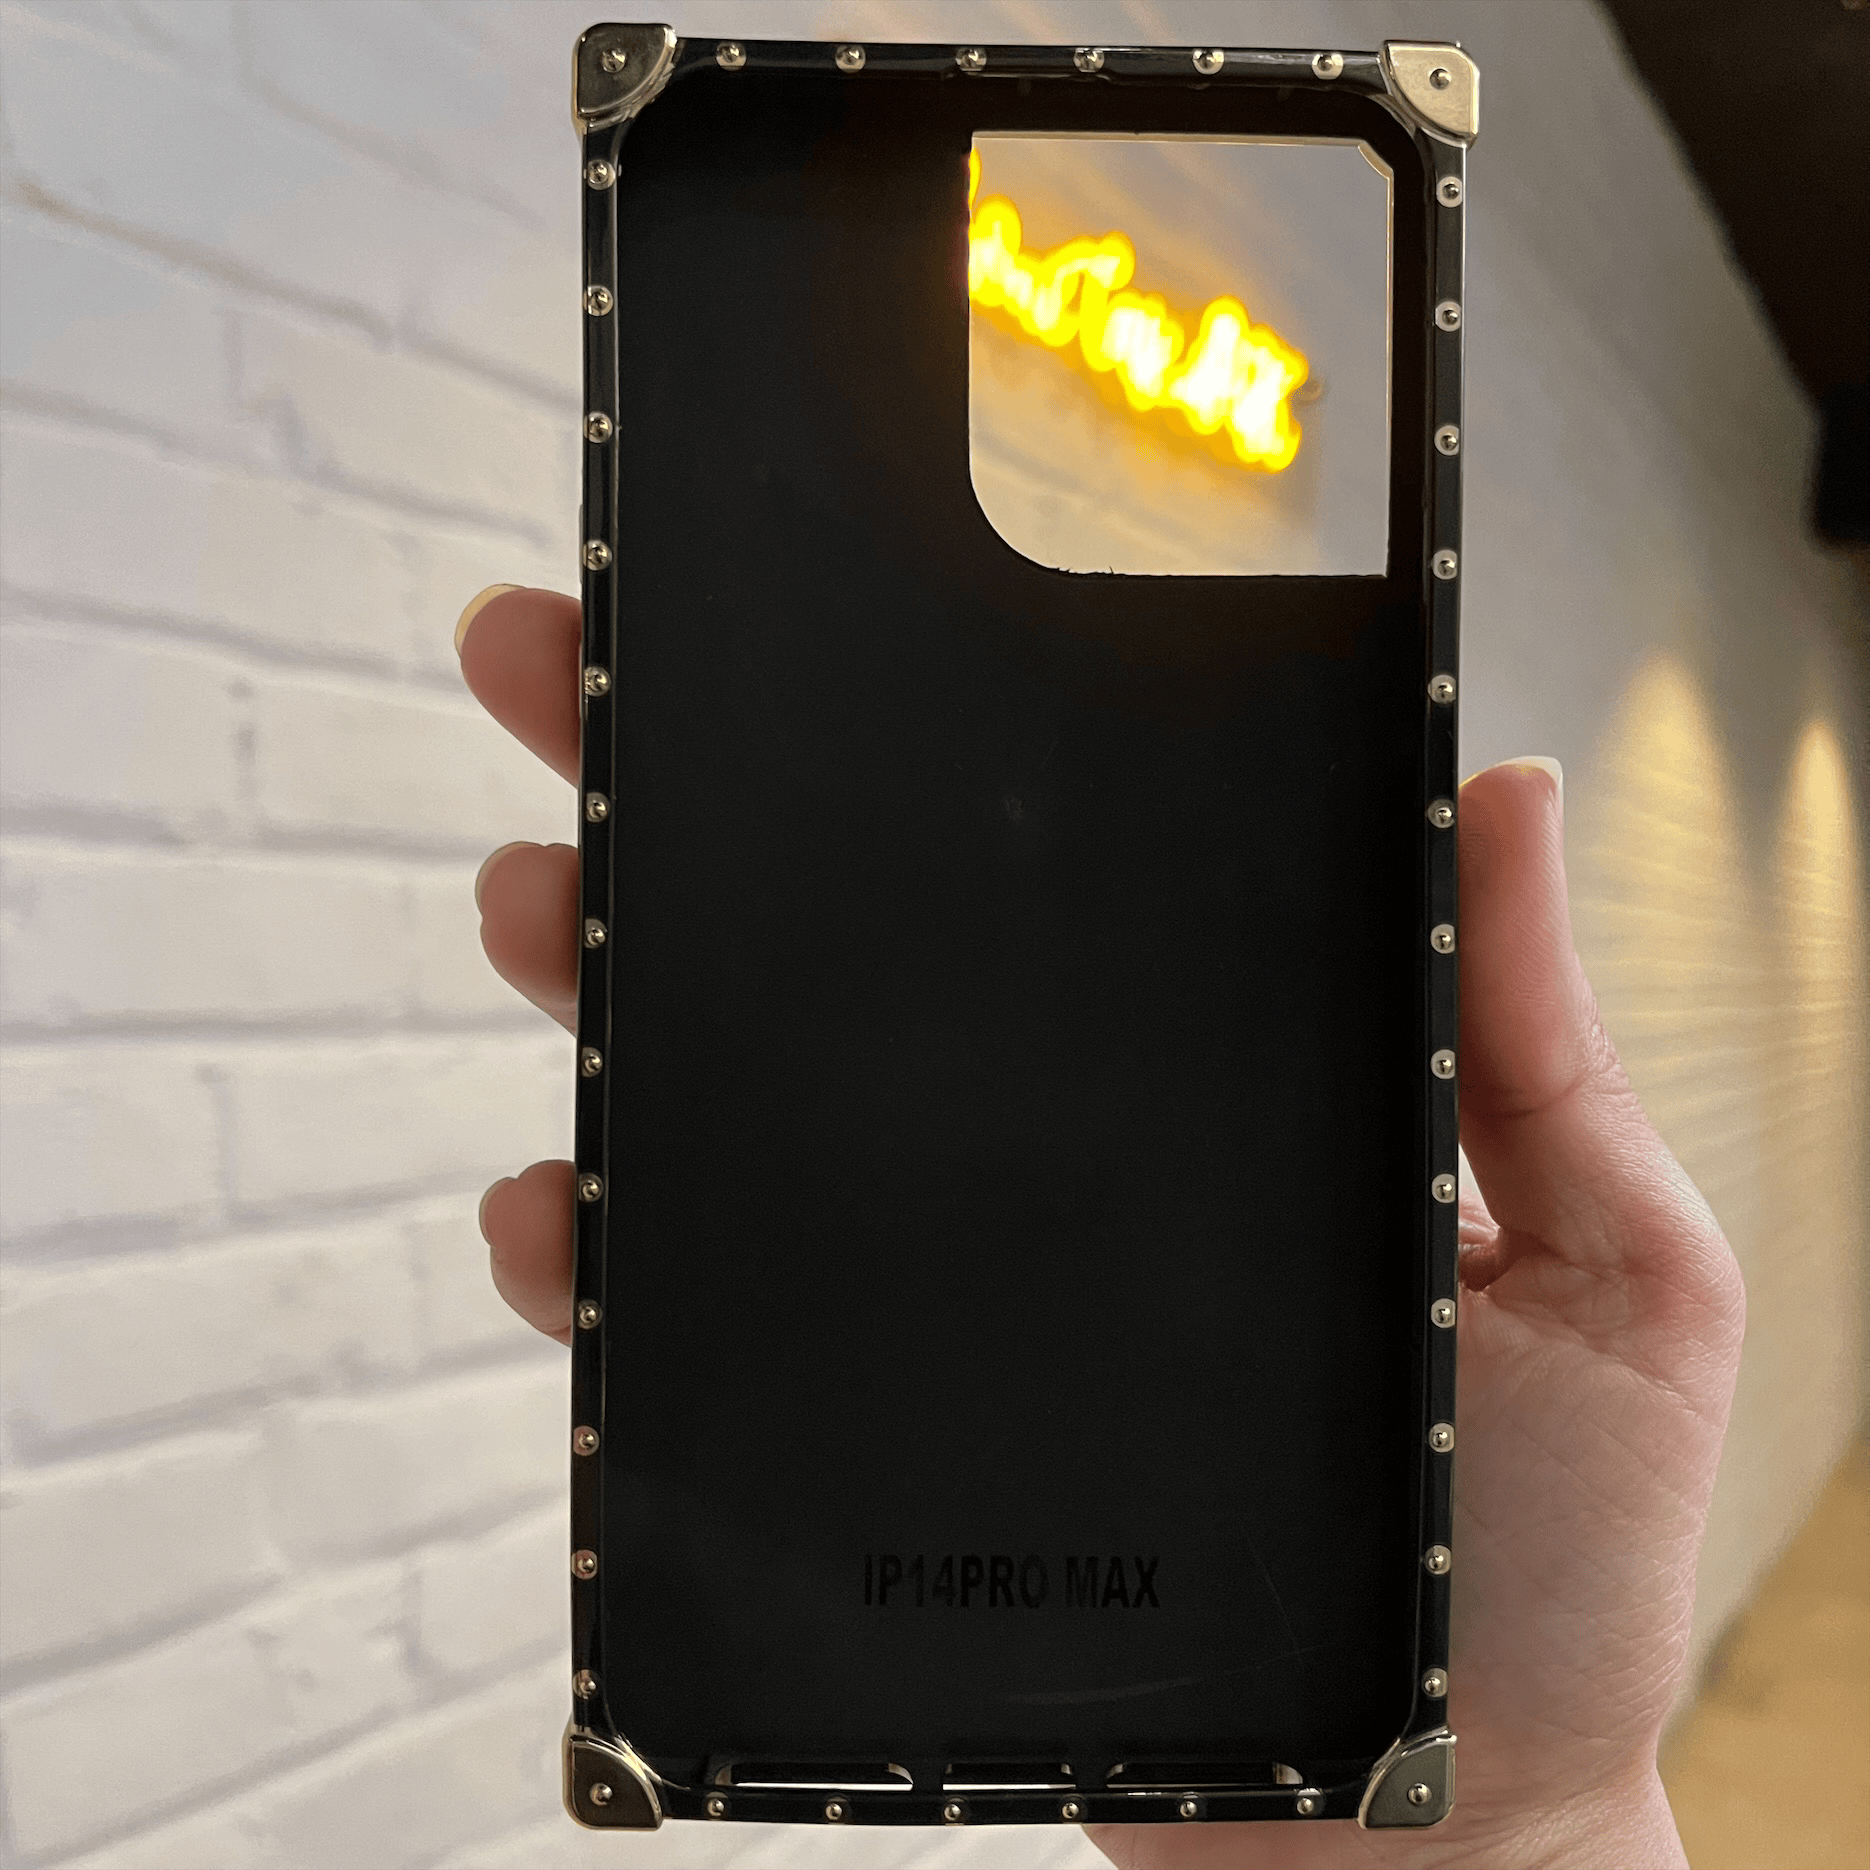 iPhone XS Luxury Space Bear Case With Hidden Folding Stand Case